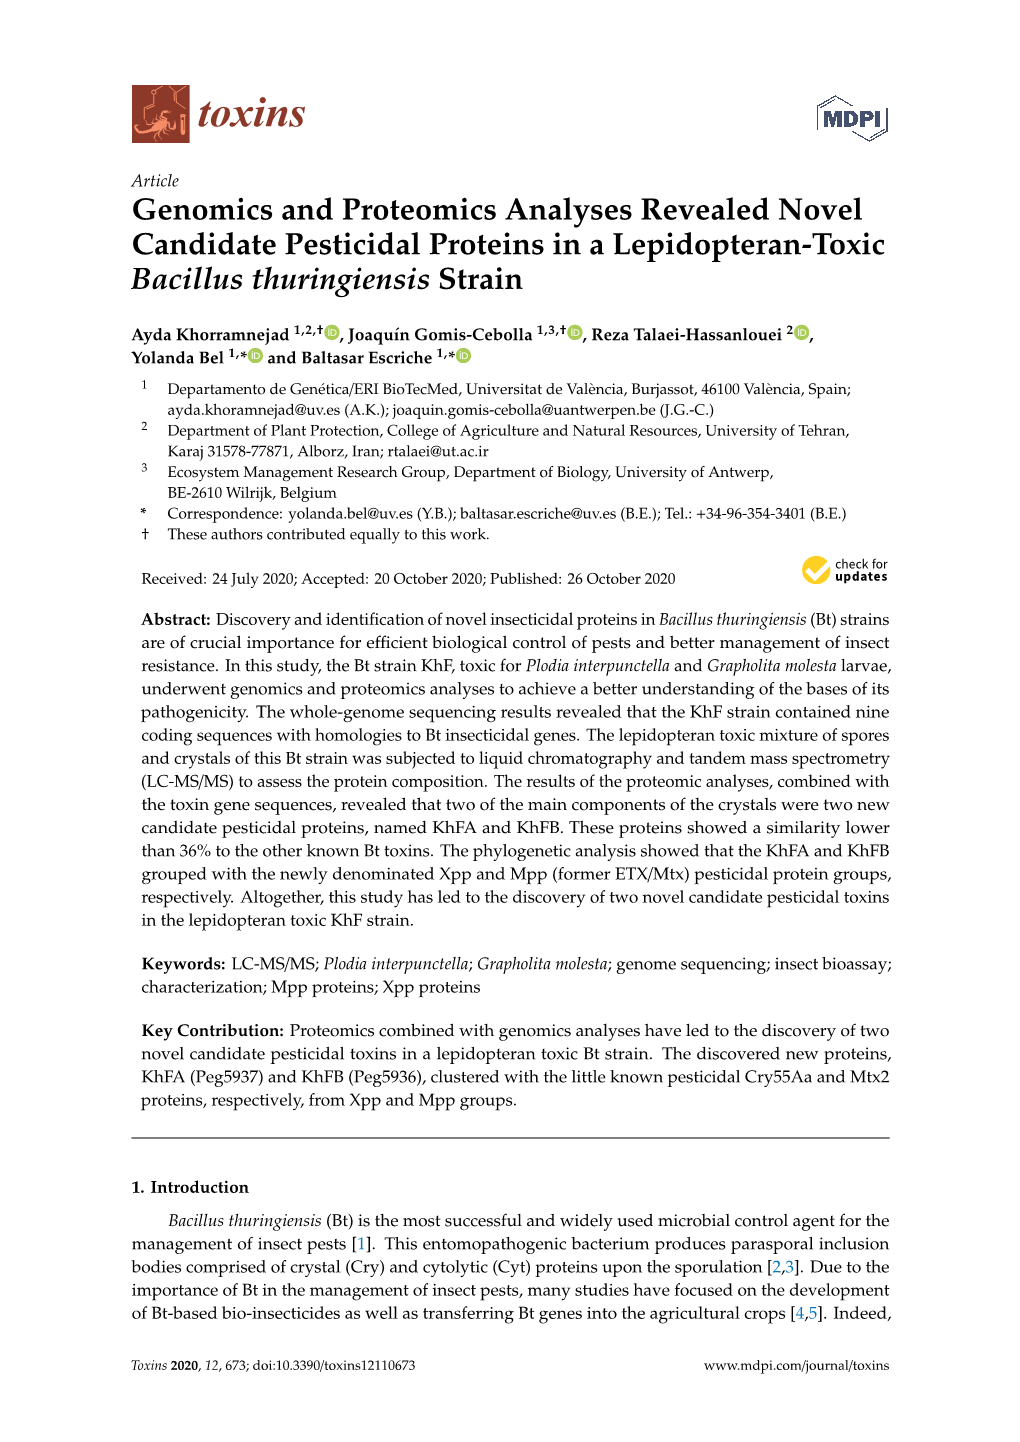 Genomics and Proteomics Analyses Revealed Novel Candidate Pesticidal Proteins in a Lepidopteran-Toxic Bacillus Thuringiensis Strain